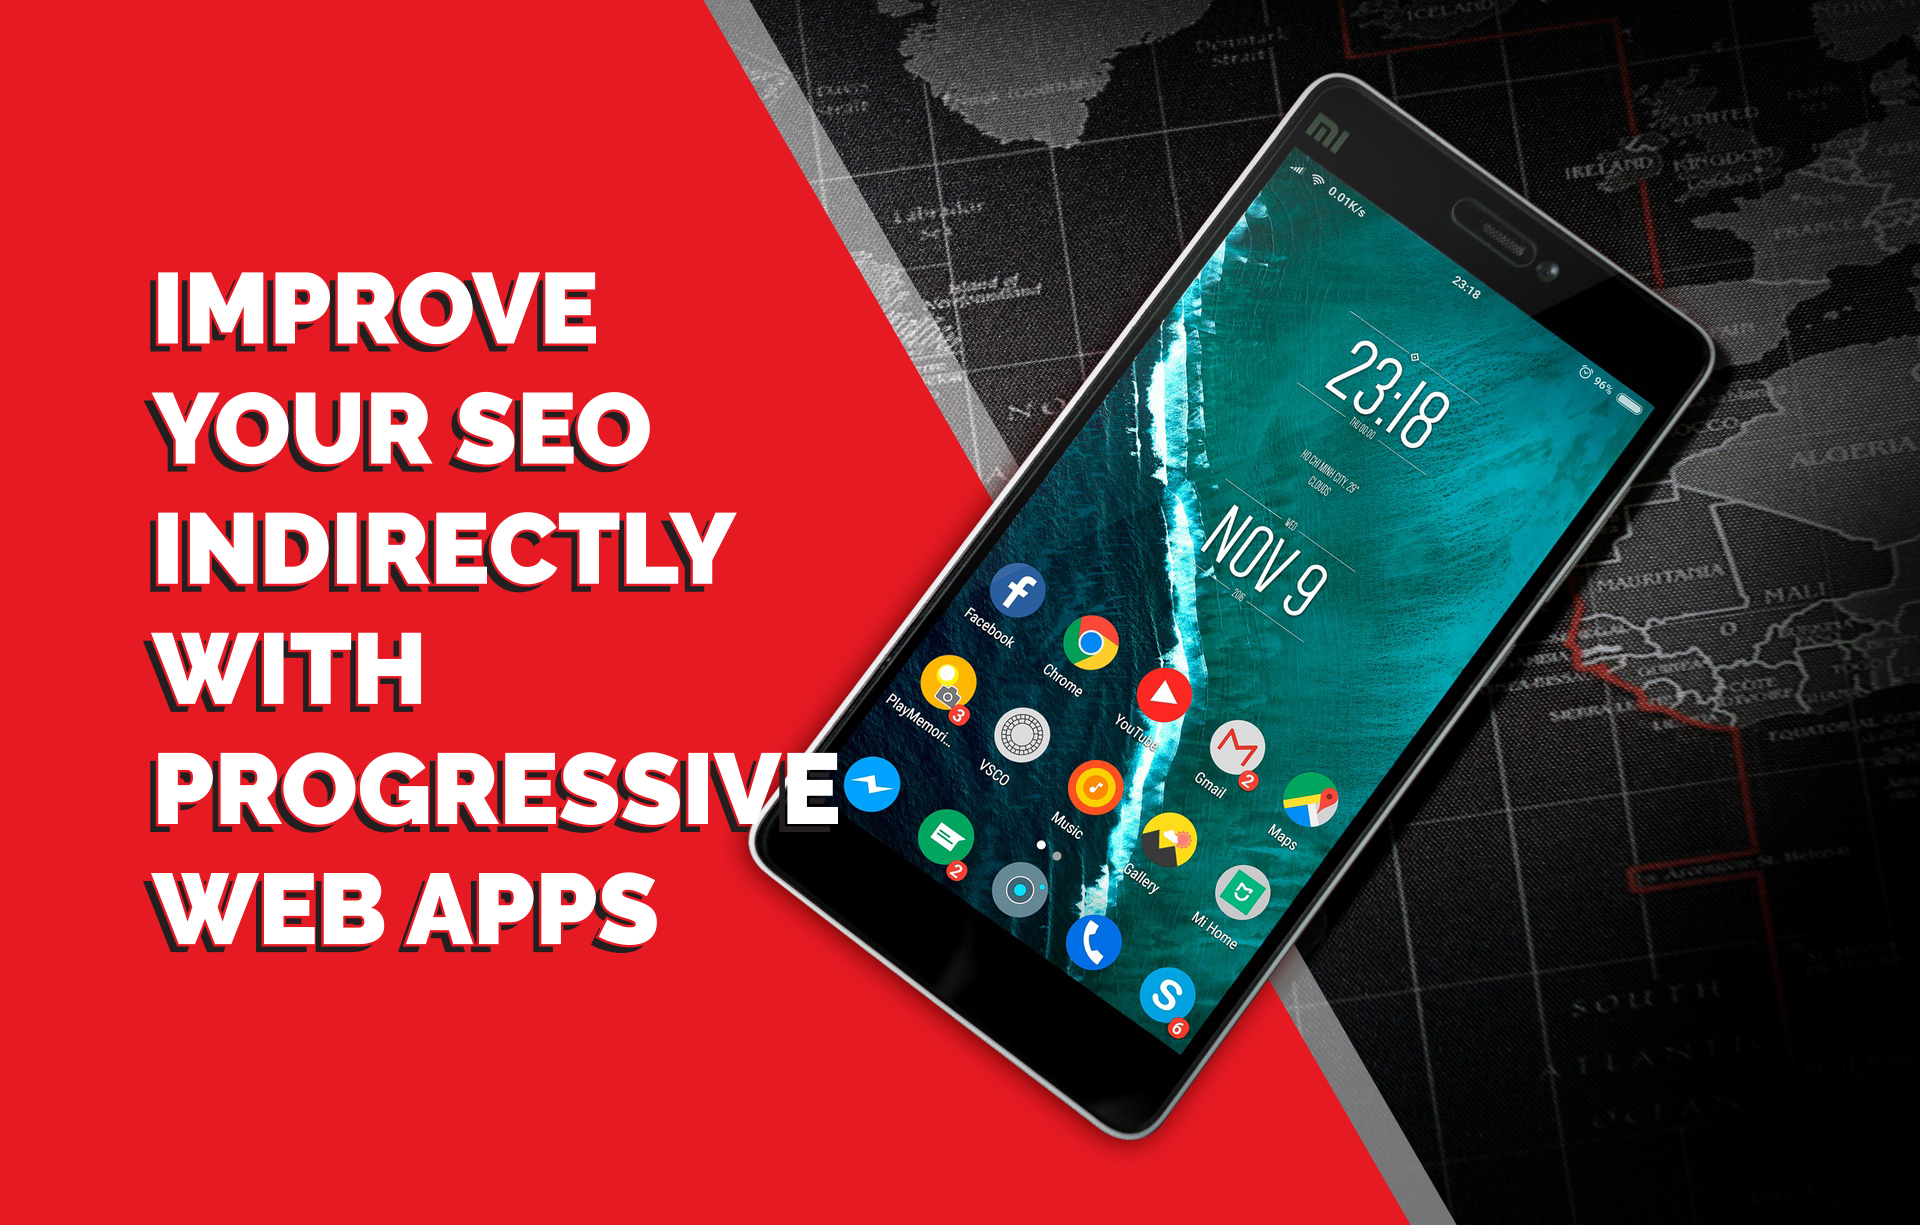 improve_your_seo_indirectly_with_progressive_web_apps-1